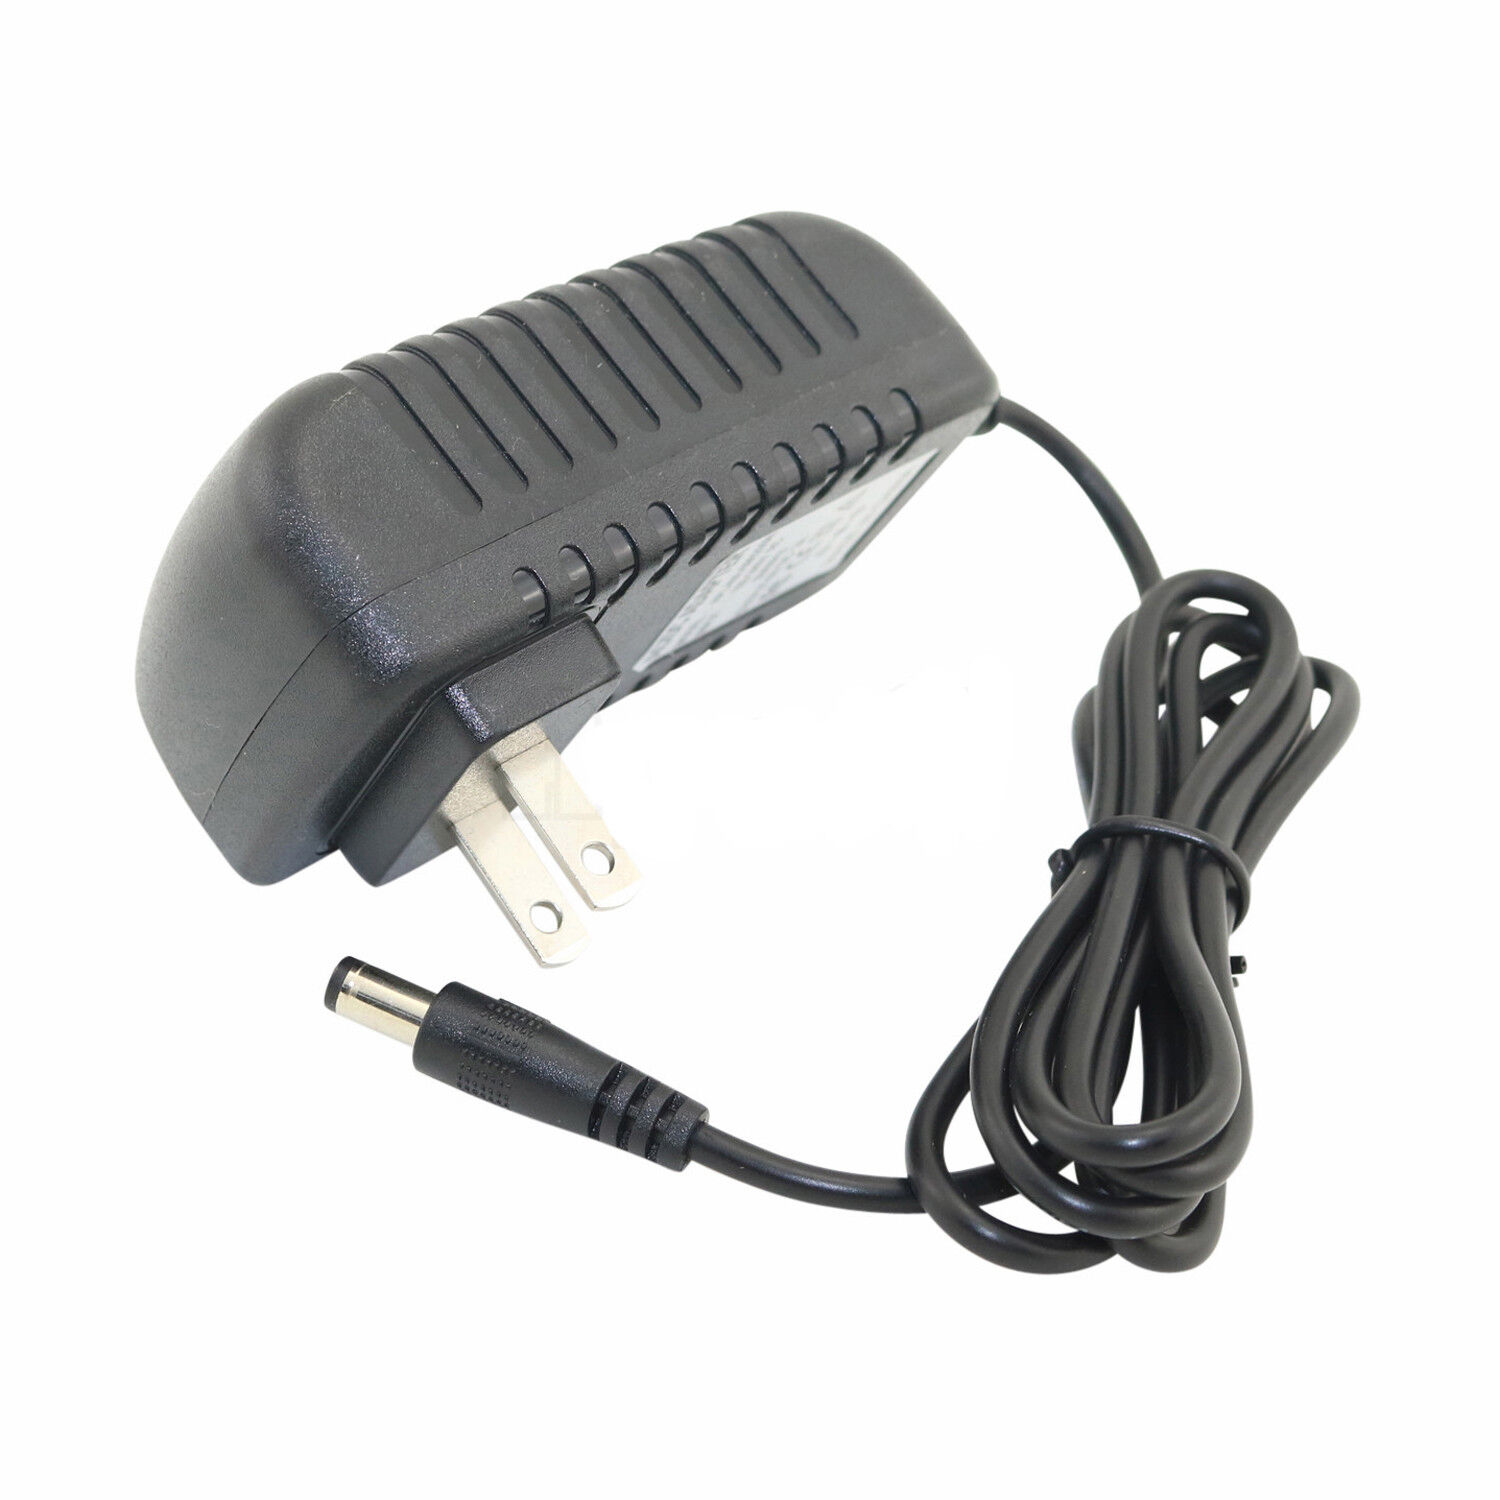 Canon LEGRIA FS46 FS306 FS406 camcorder power supply ac adapter cord charger input:110-240v output:8.4v 1.5a compatib